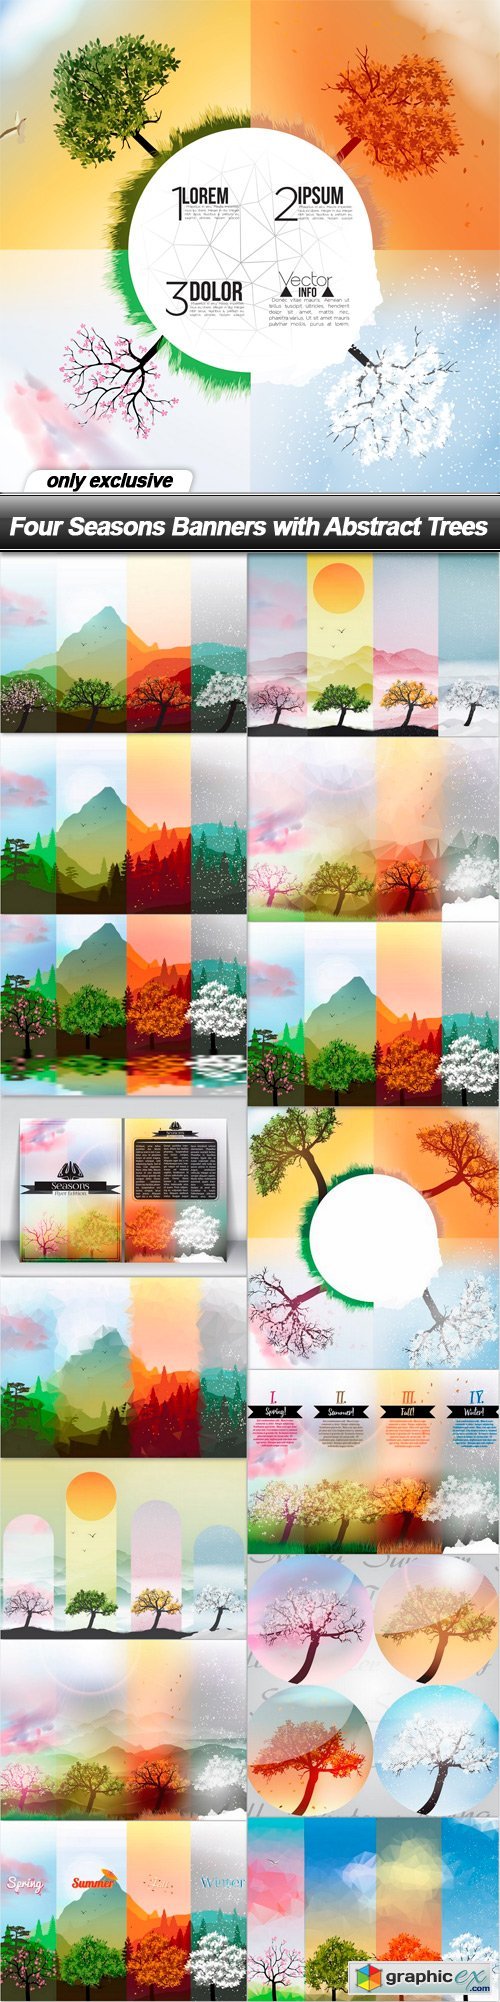 Four Seasons Banners with Abstract Trees - 16 EPS